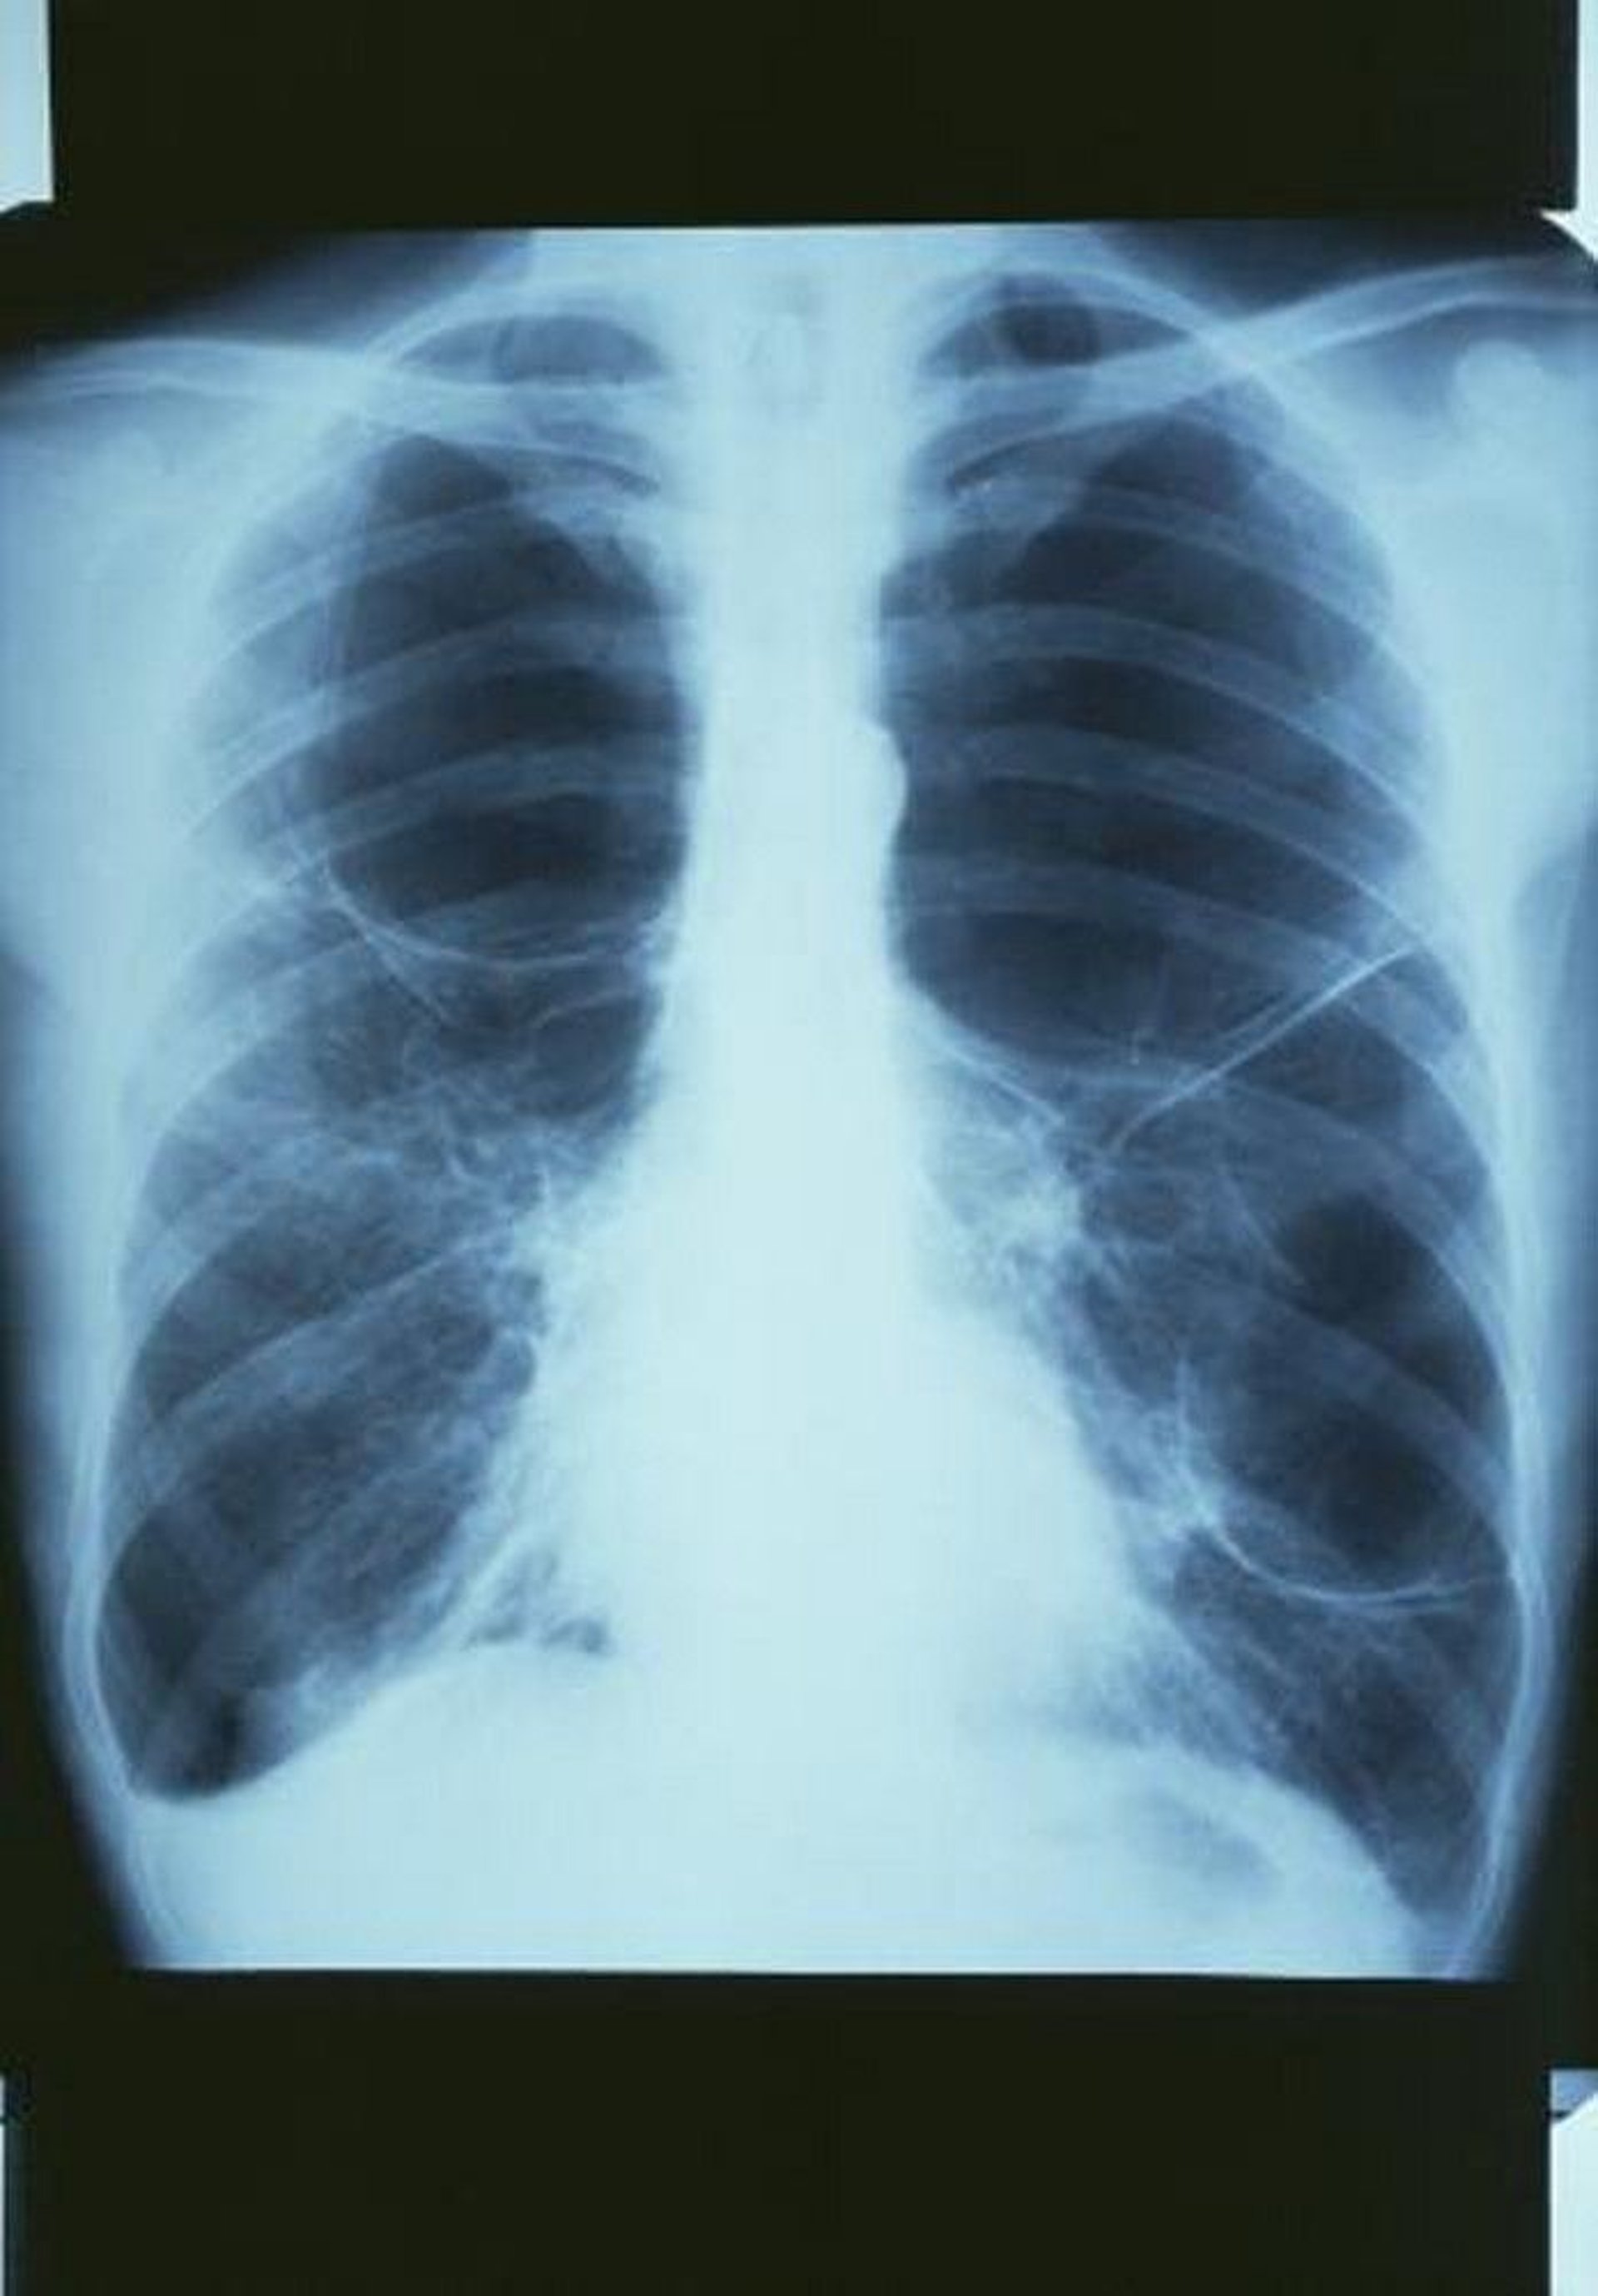 COPD with Bullae